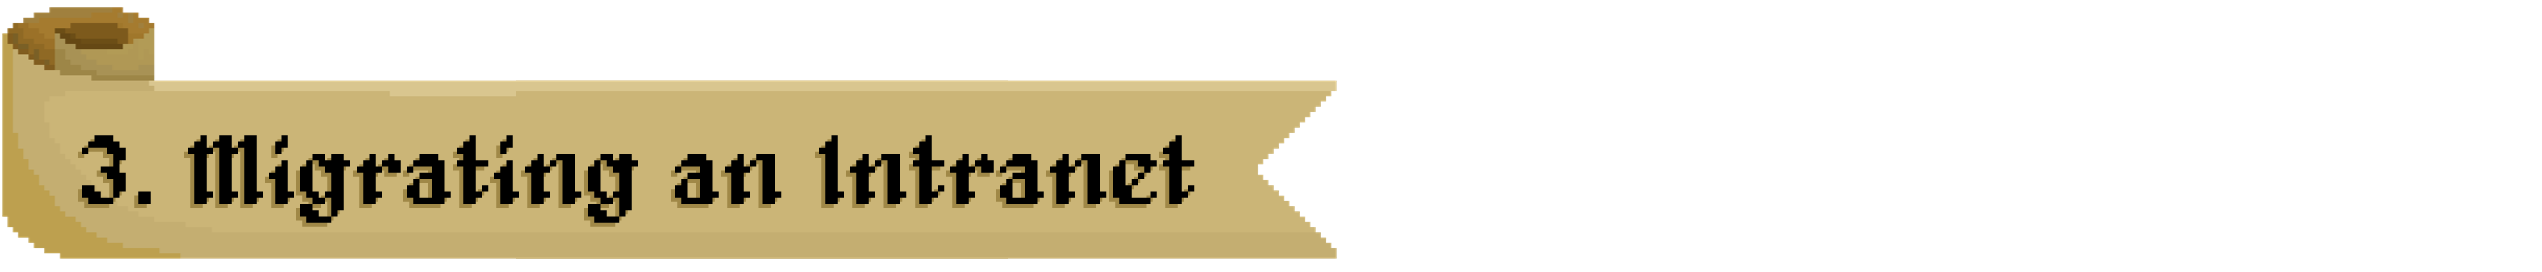 A pixel scroll that reads: "3. Migrating an Intranet"